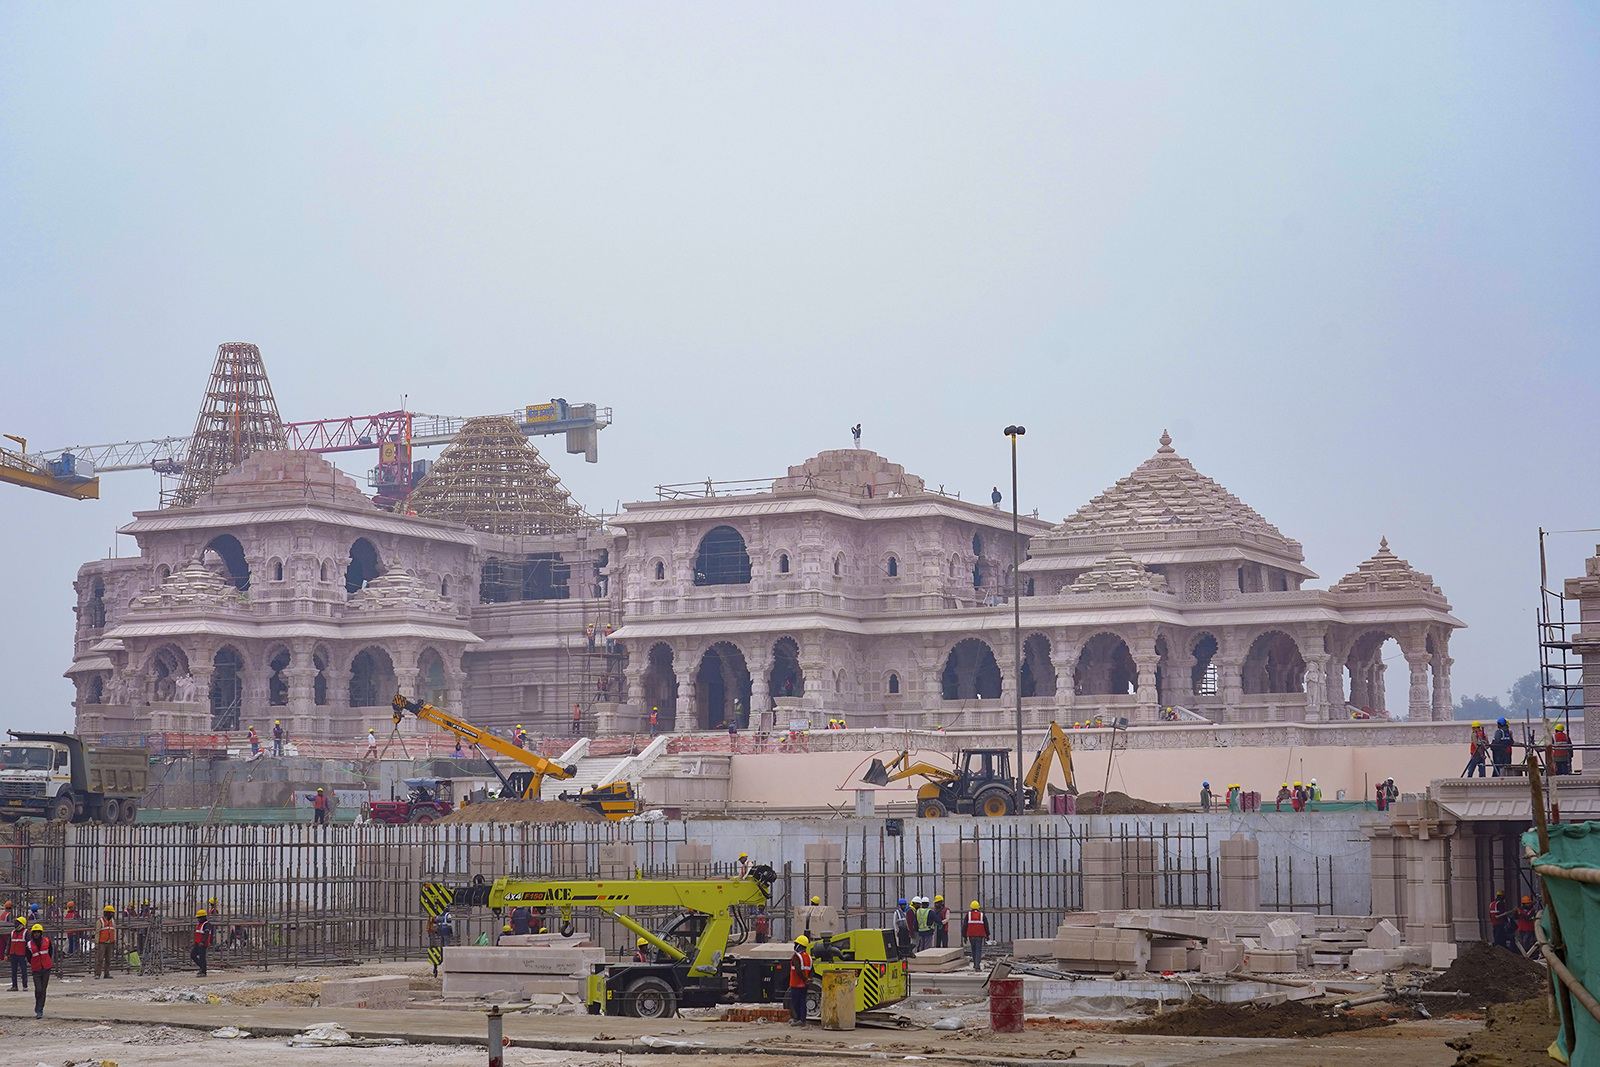 Construction crews works on Ram Mandir, a Hindu temple dedicated to Lord Ram in Ayodhya, India, Tuesday, Jan. 16, 2024. Frenzied preparations are underway in this northern city to mark the opening of the grand temple for Lord Ram, one of Hinduism's most revered deities, culminating a decades-long Hindu nationalist pledge. (AP Photo/Deepak Sharma)